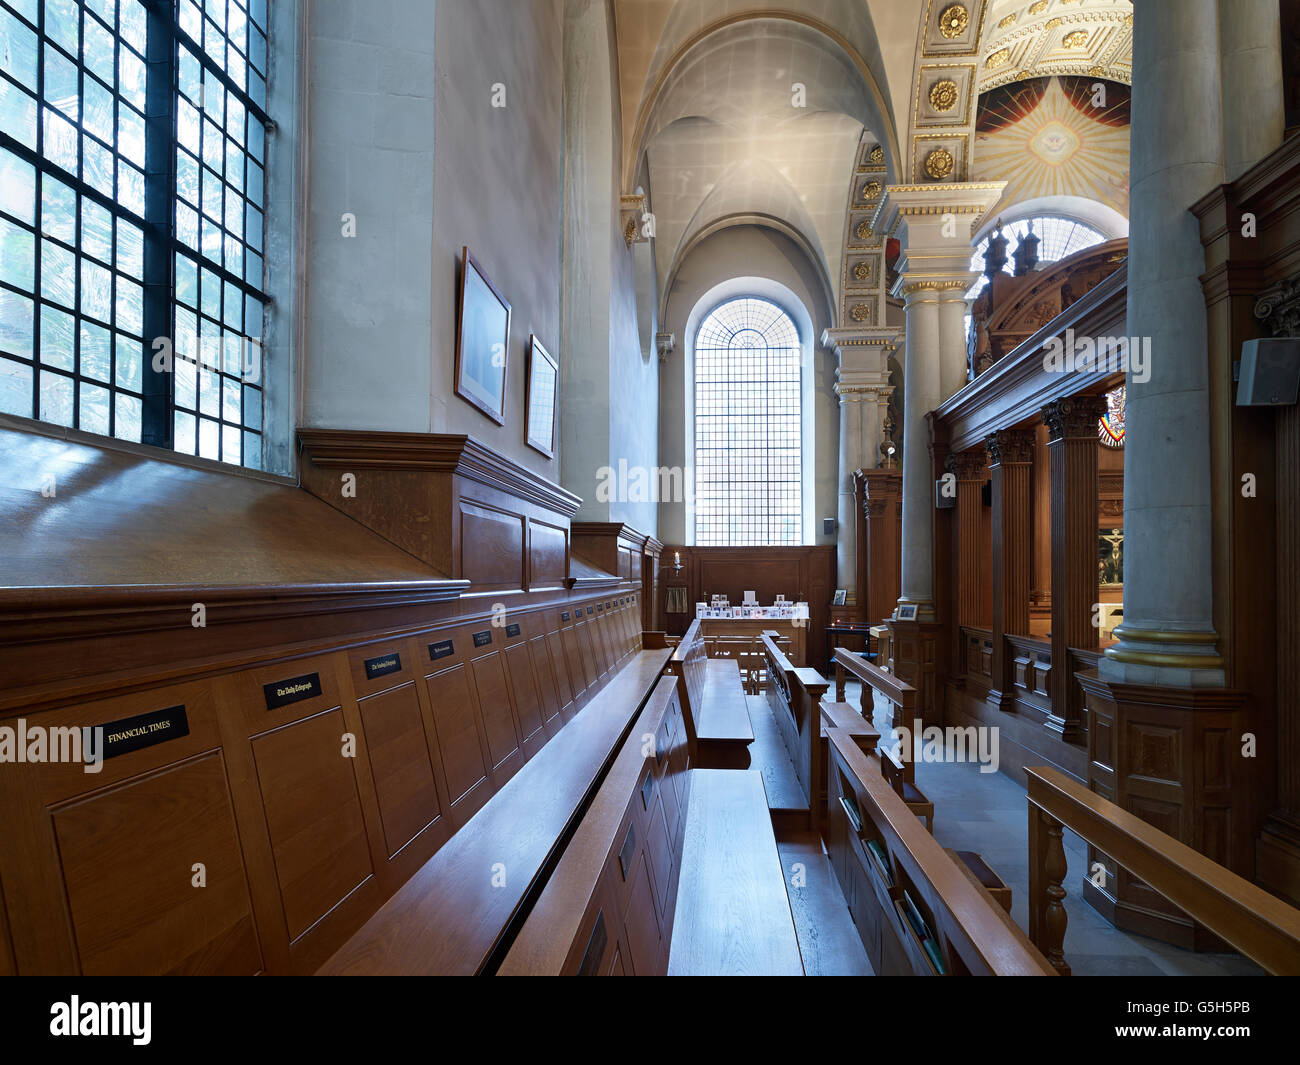 St Bride's Fleet Street, church in the City of London, north aisle with Journalists' Altar. Stock Photo